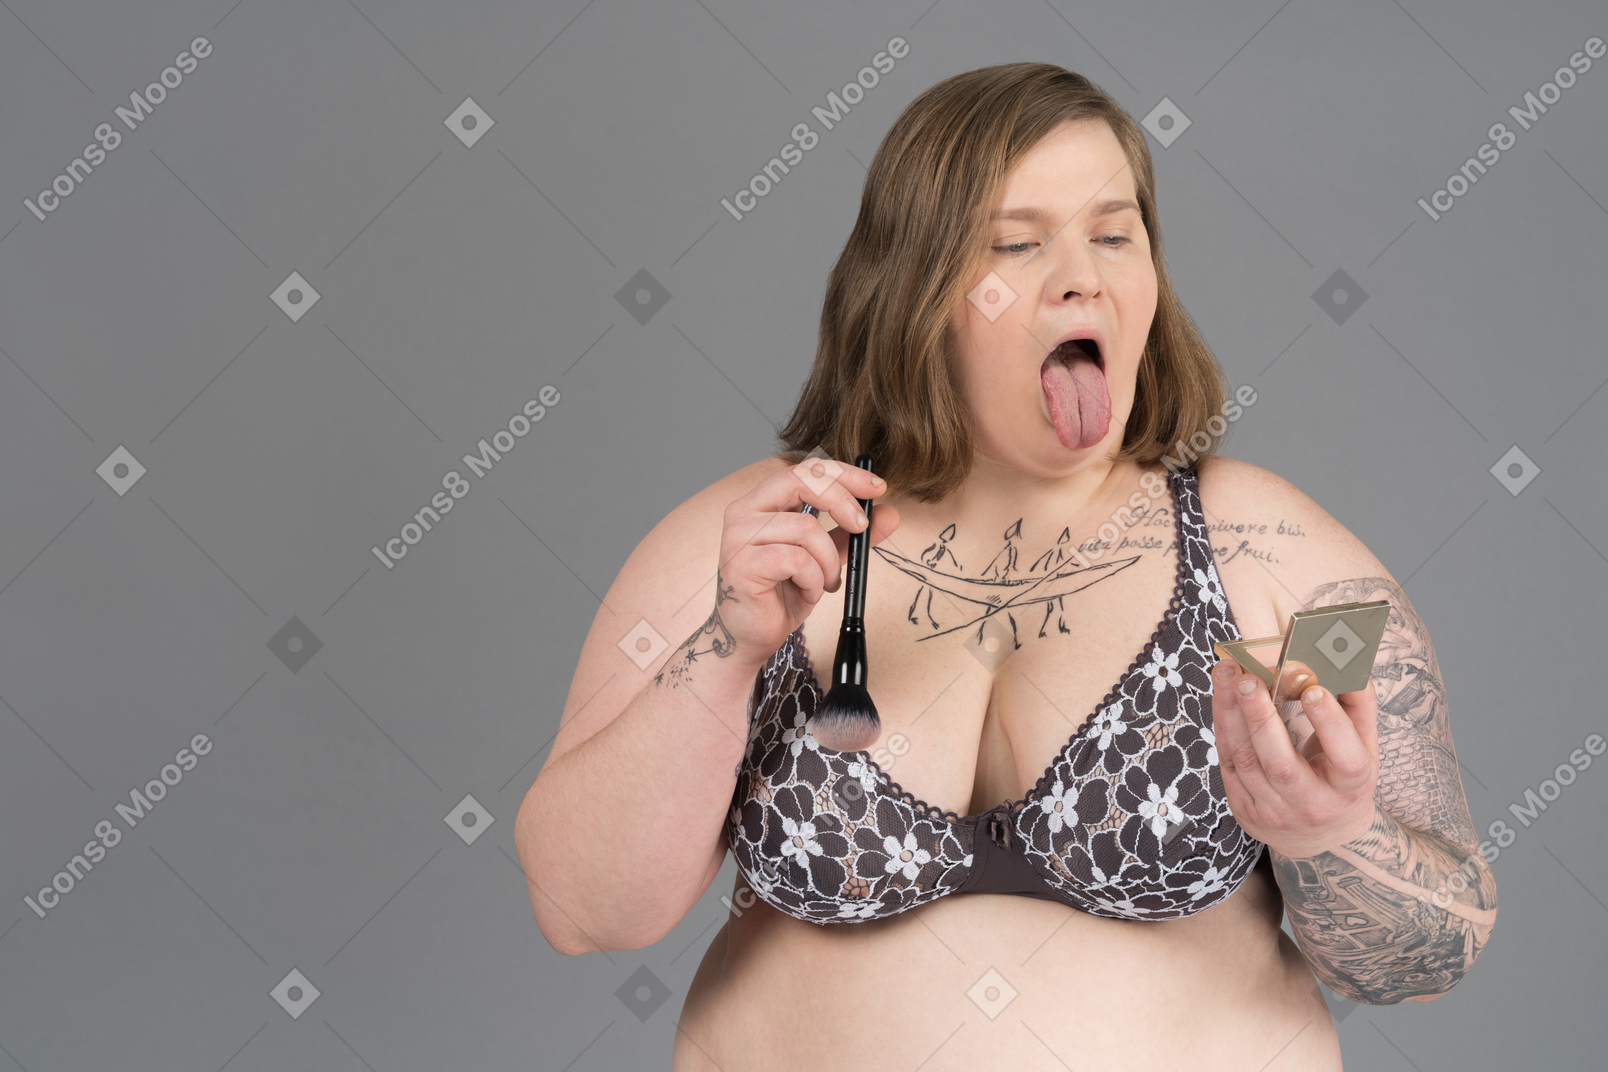 Plump woman showing tongue in hand mirror